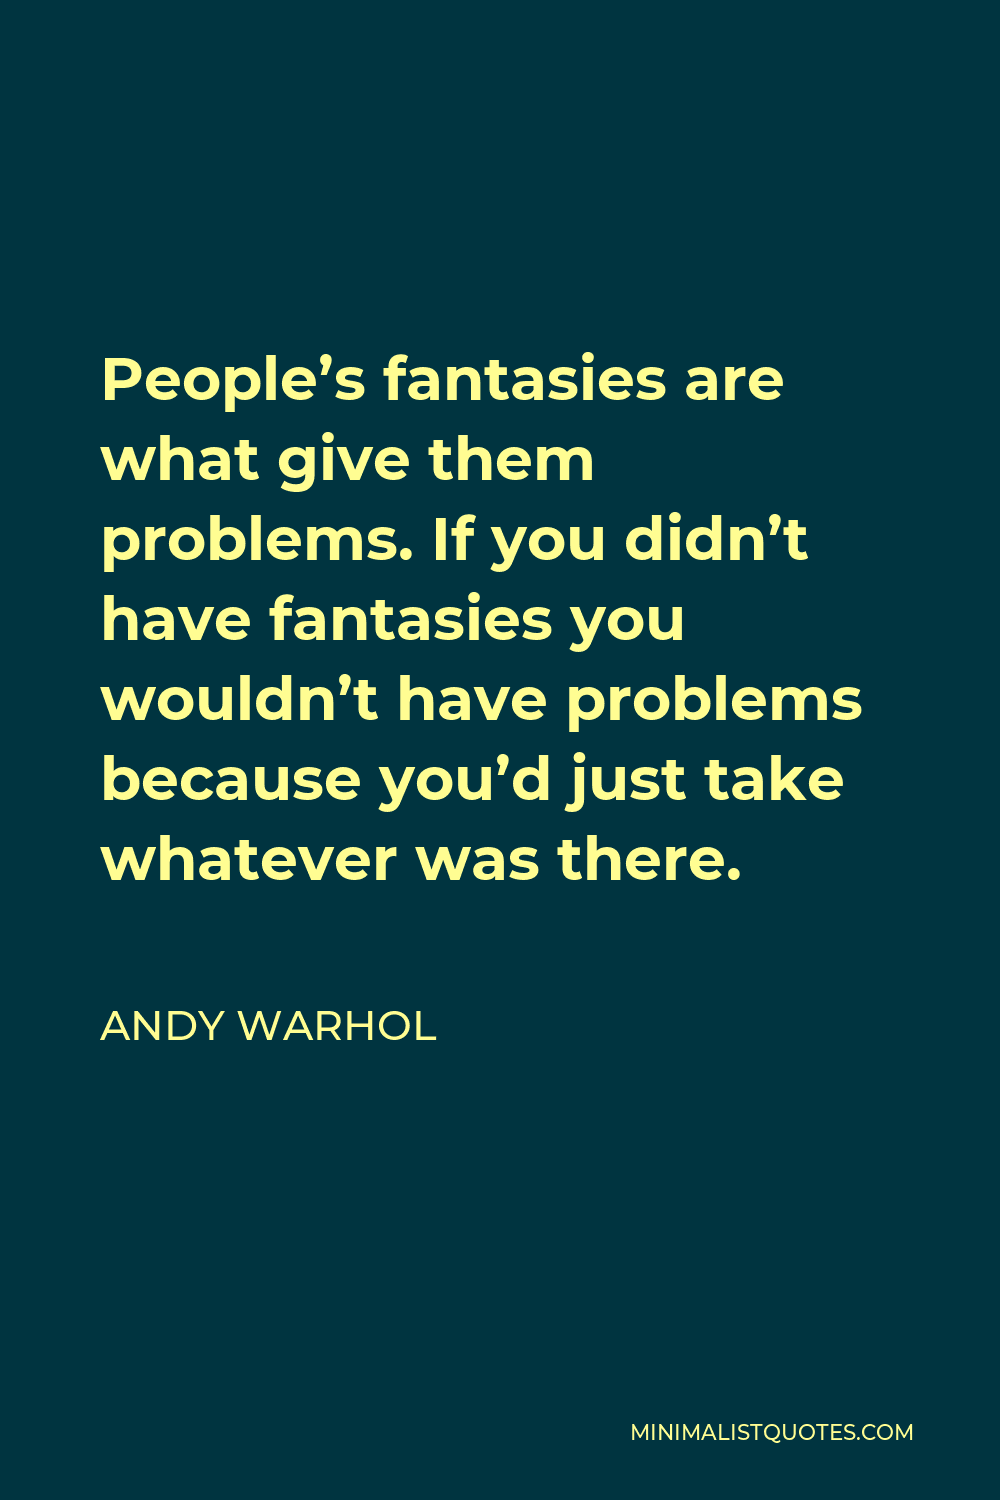 Andy Warhol Quote - People’s fantasies are what give them problems. If you didn’t have fantasies you wouldn’t have problems because you’d just take whatever was there.